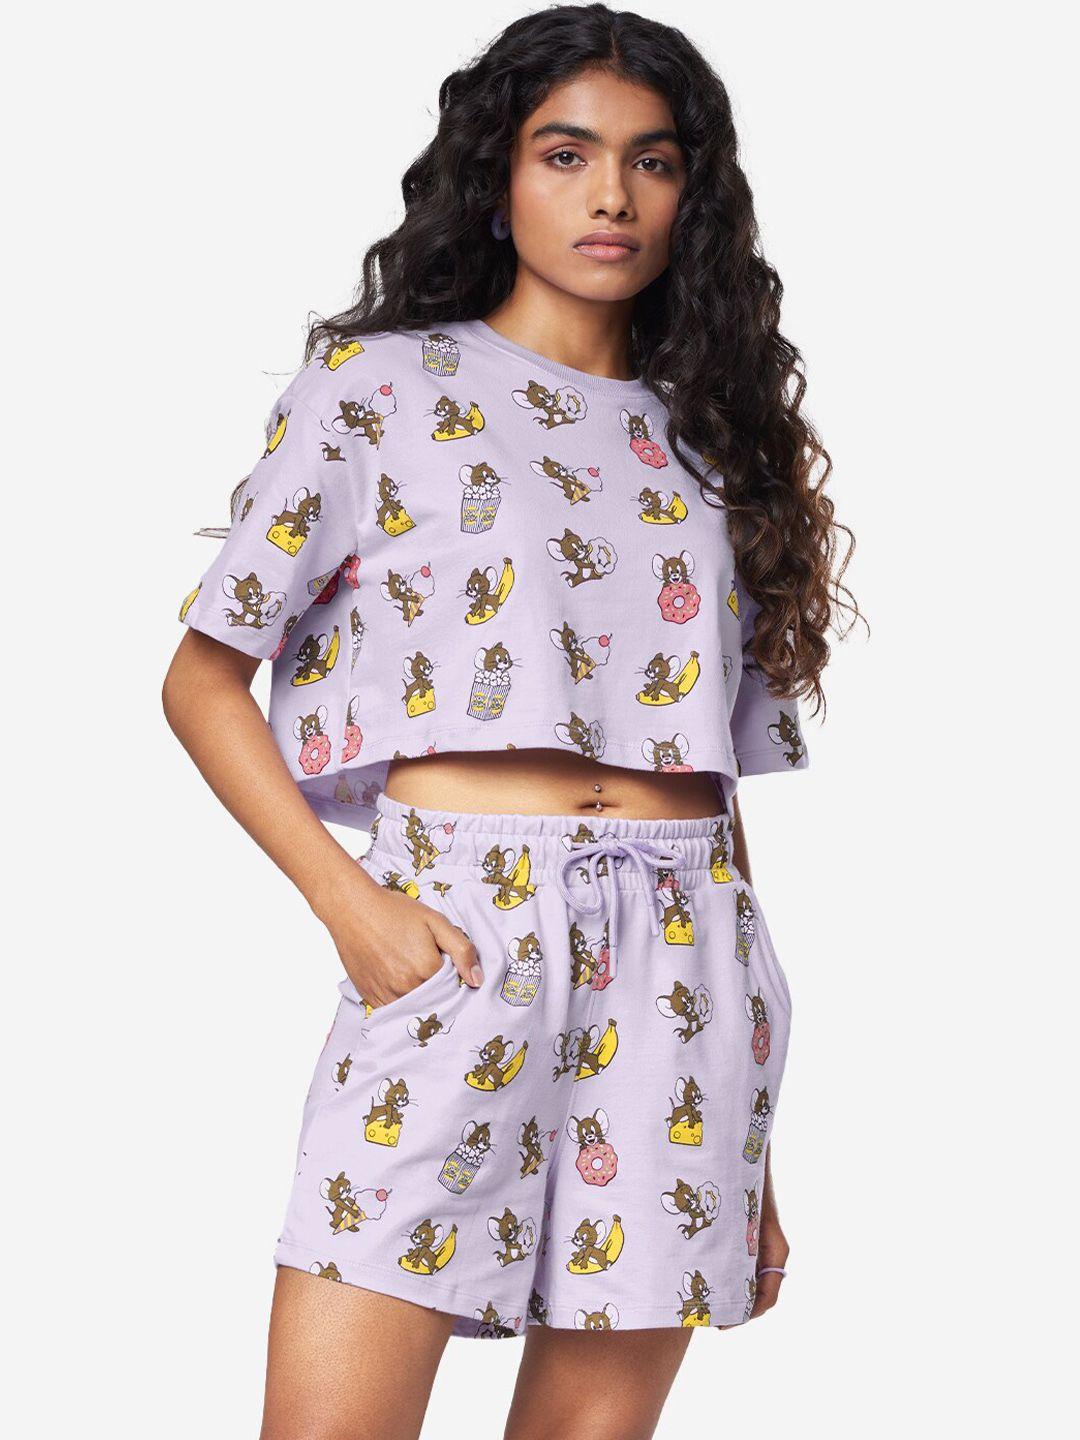 the souled store women lavender jerry printed co-ords set